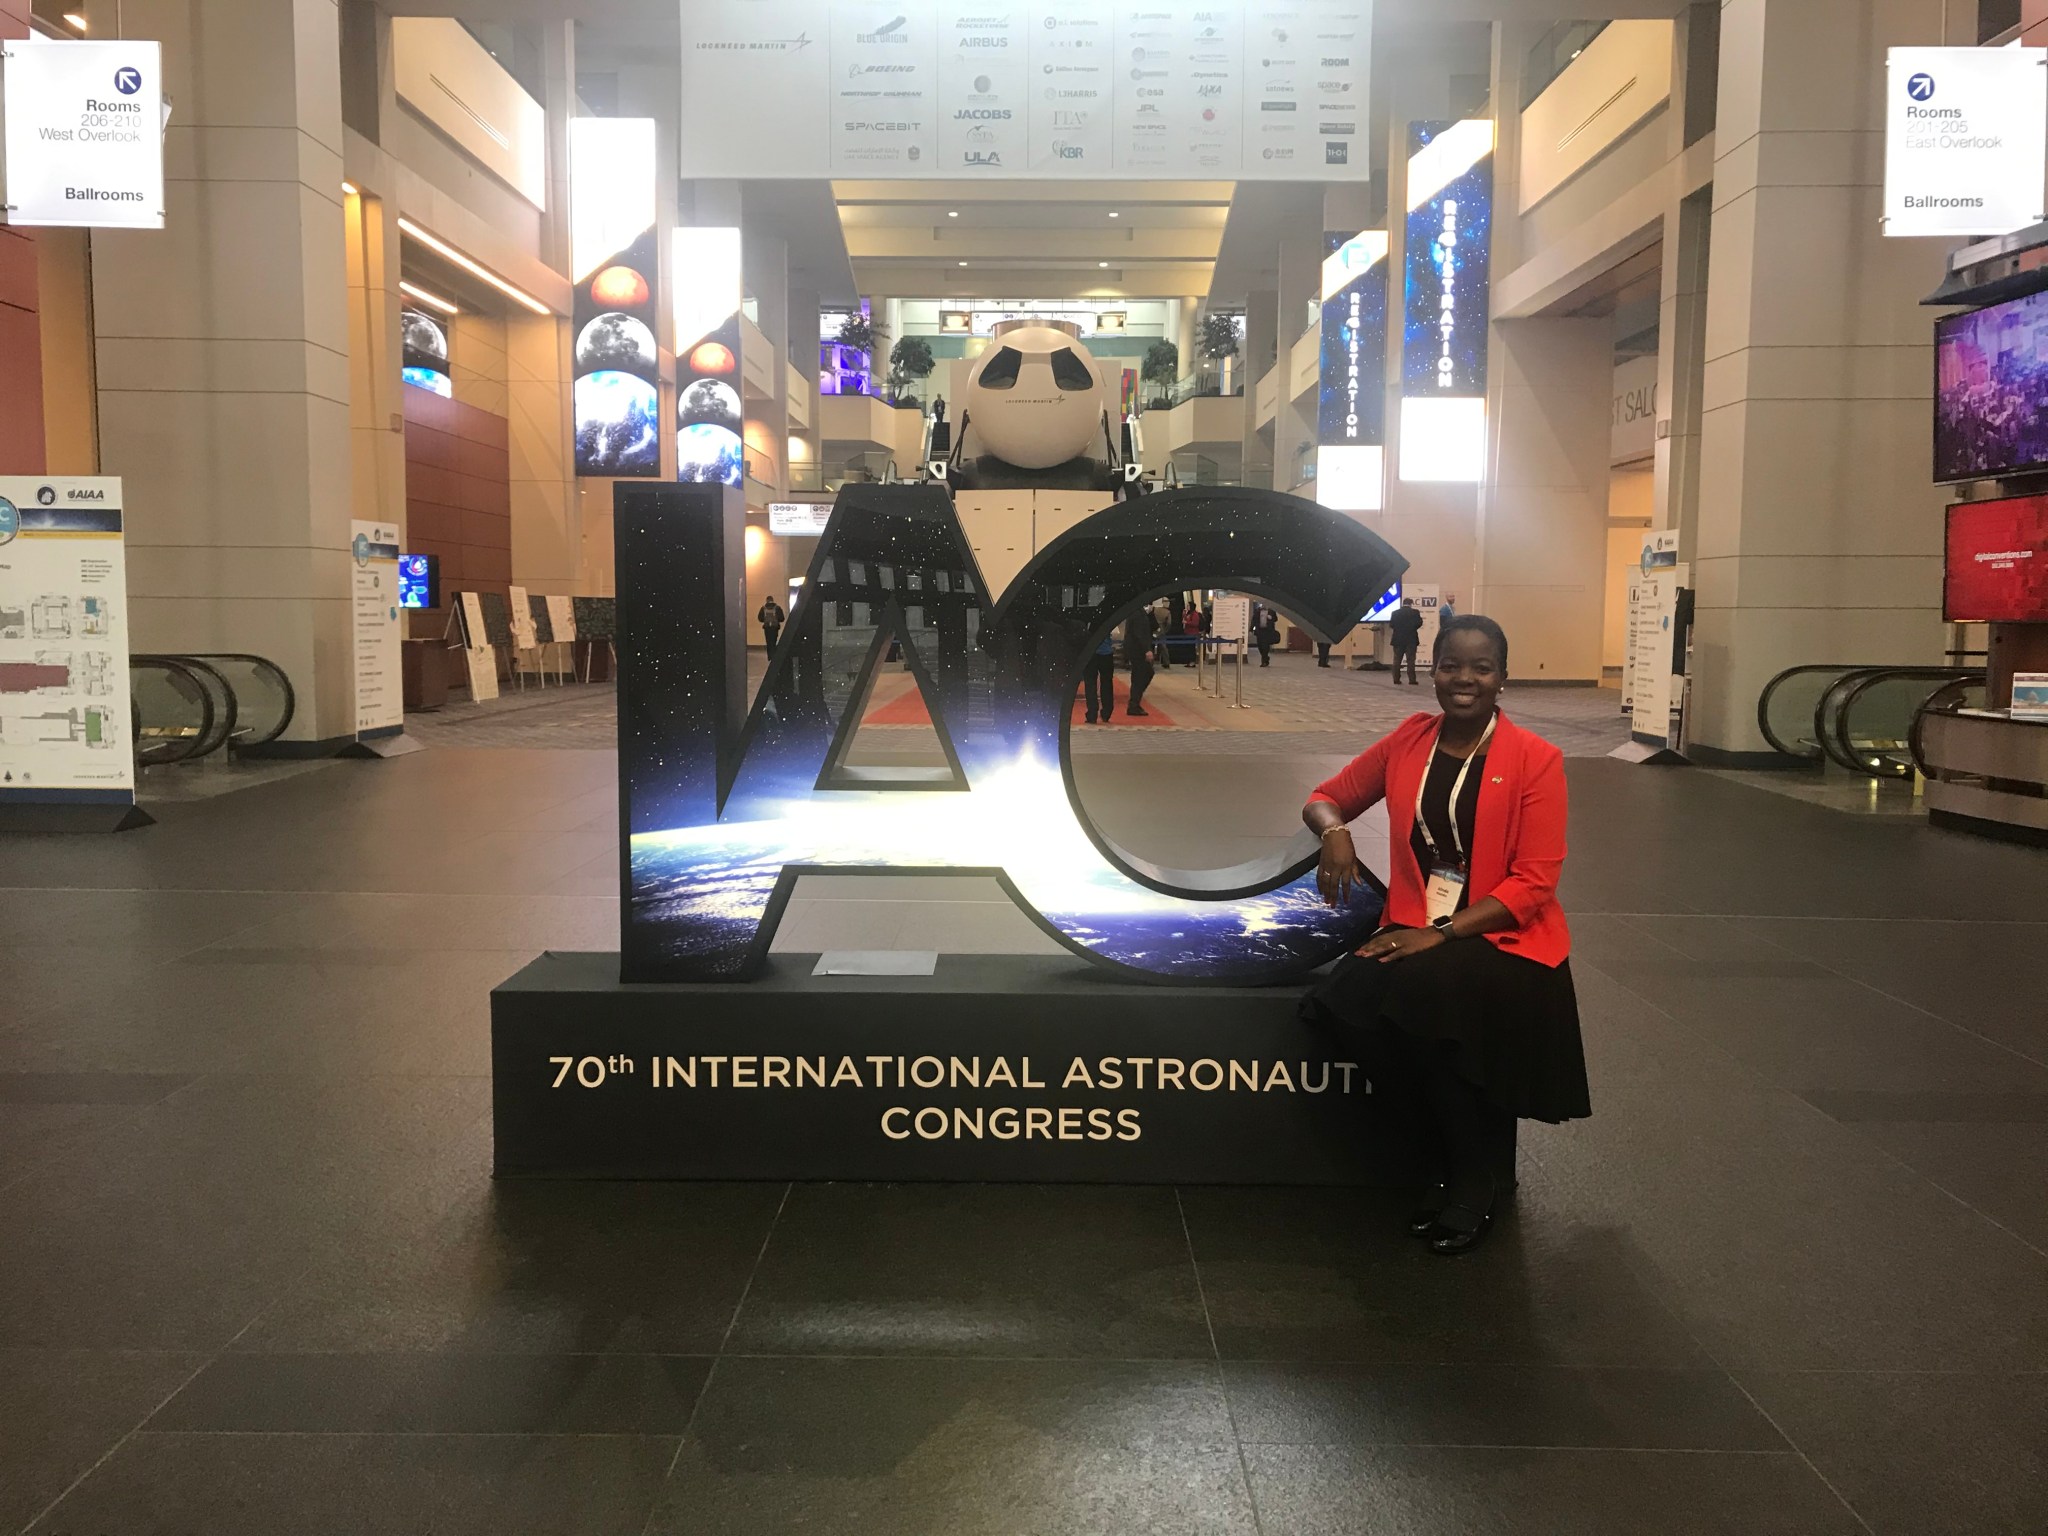 Dr. Mashiku sits on a sign with giant letters "IAC" and the words "70th International Astronaut Congress." She is wearing a black dress, red blazer, black boots, and a white lanyard. The background is a conference center.